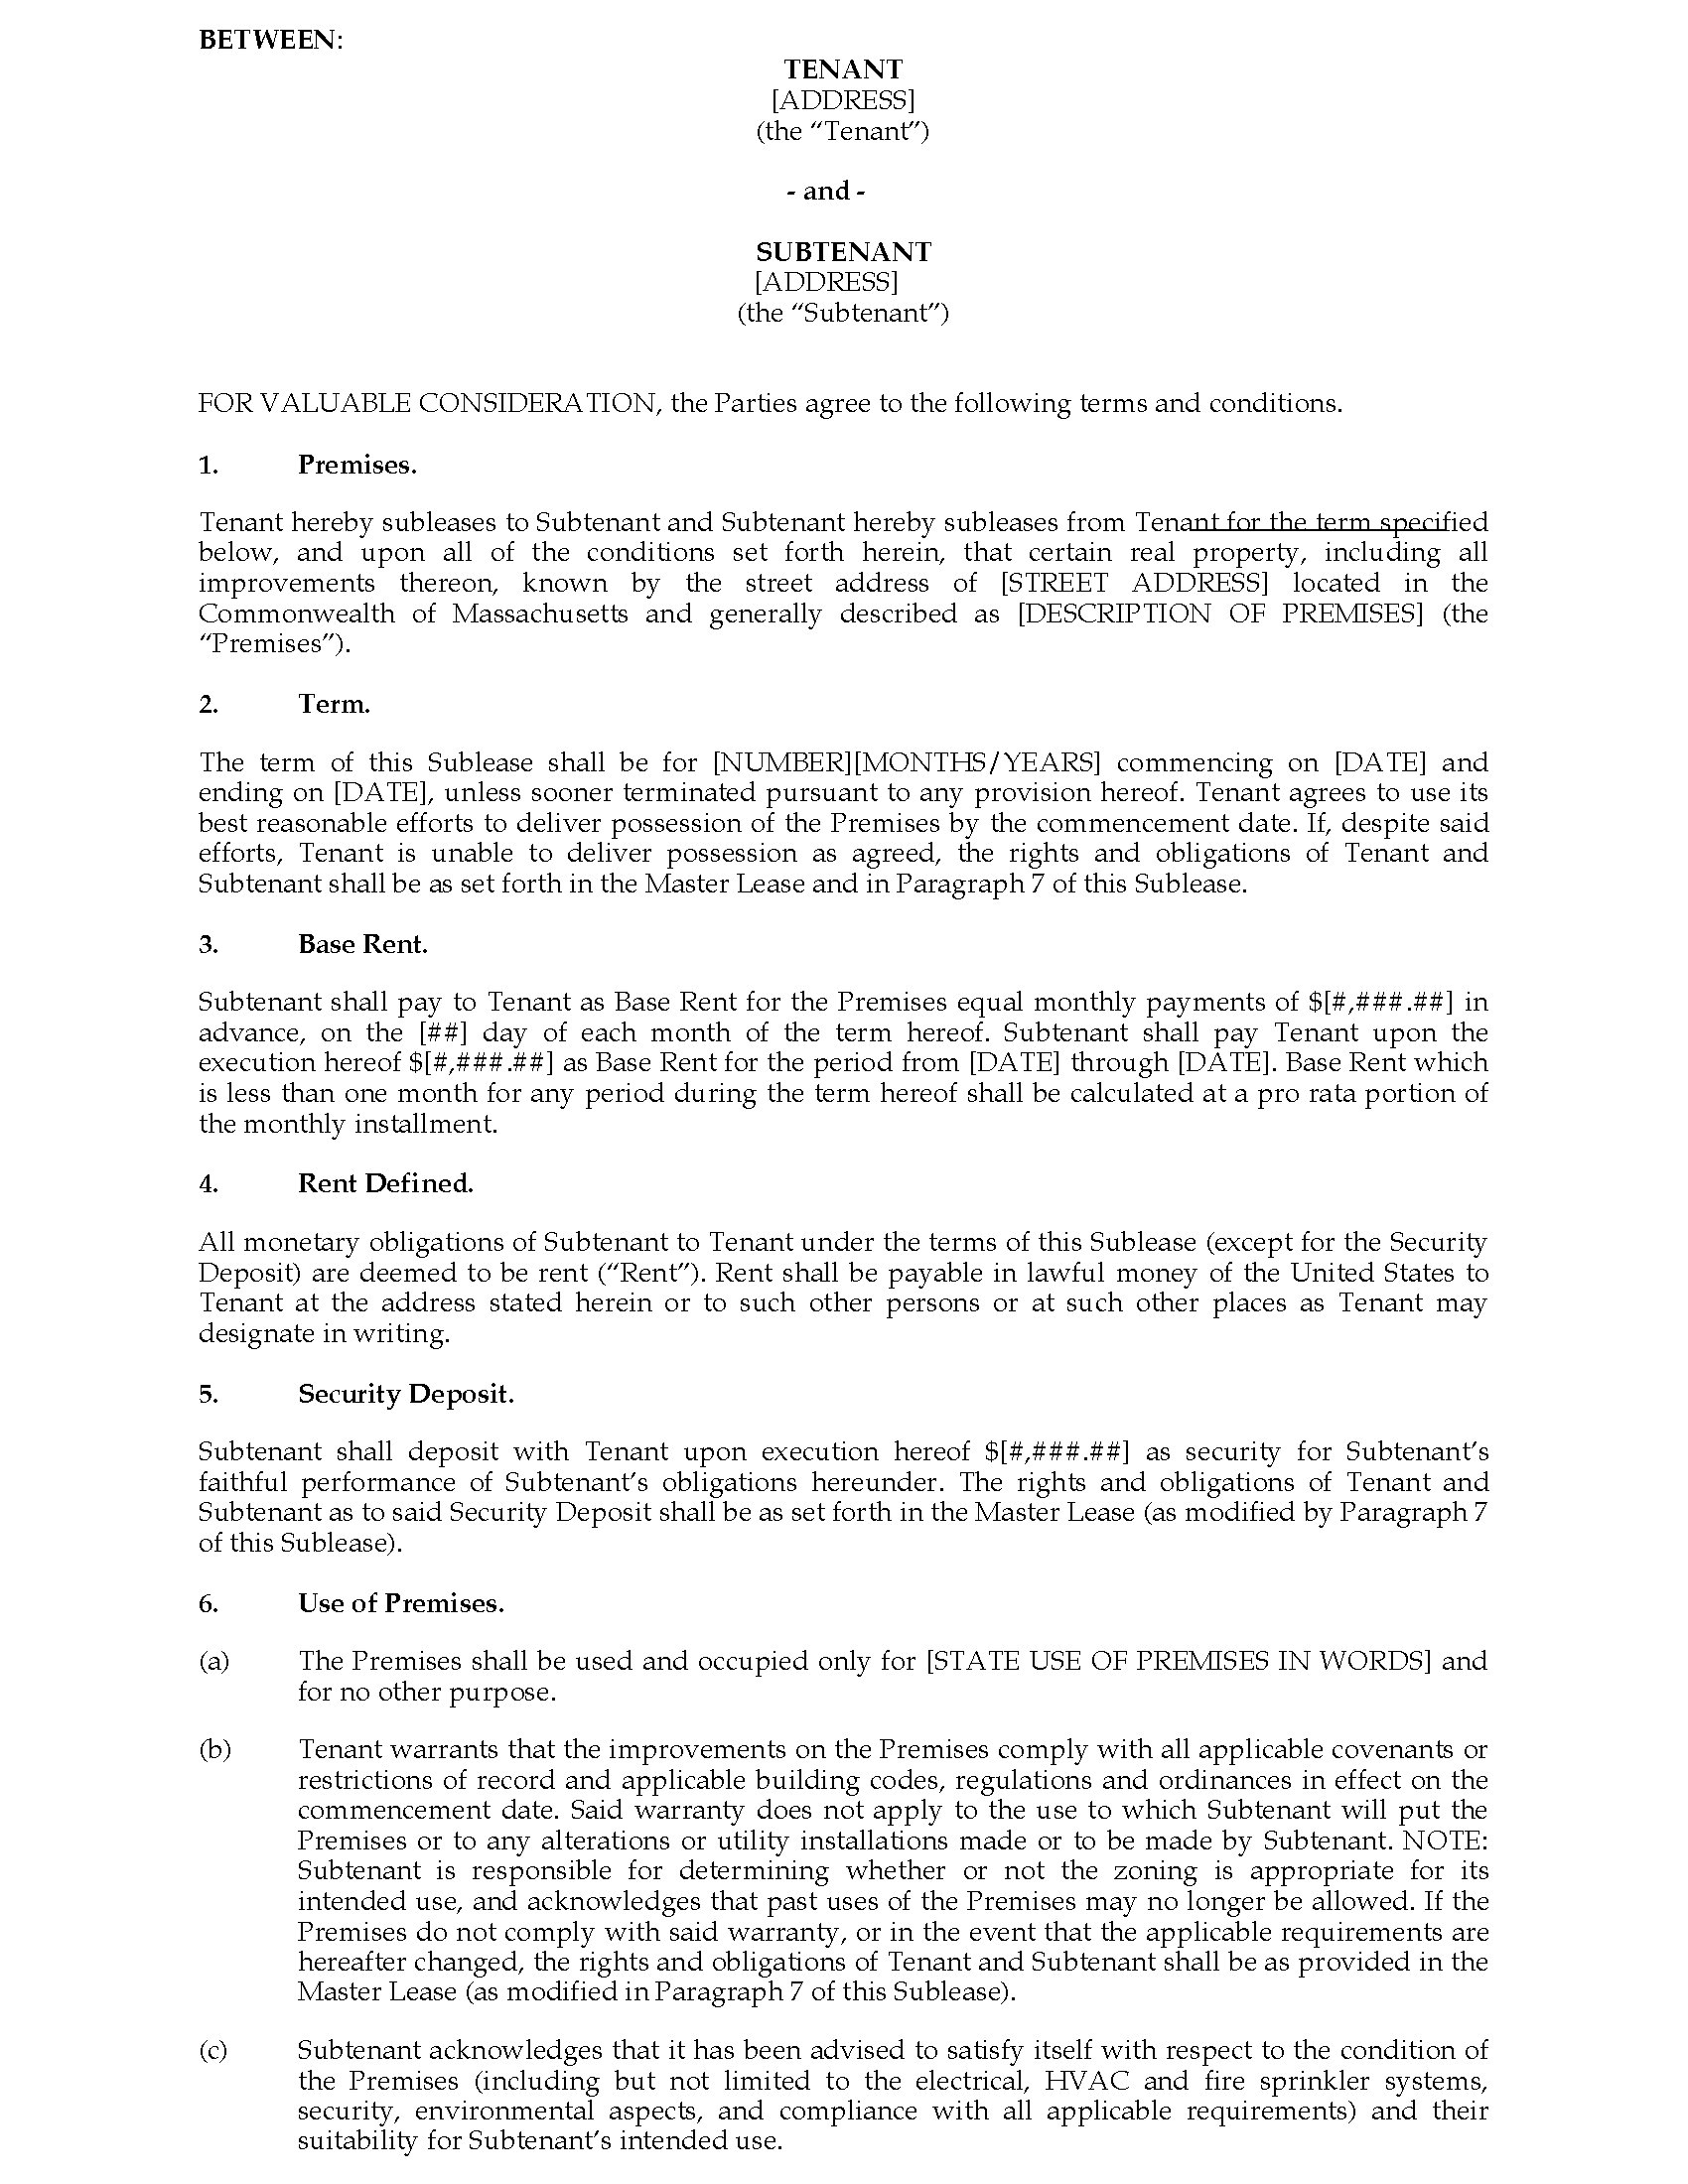 massachusetts-commercial-sublease-agreement-legal-forms-and-business-templates-megadox